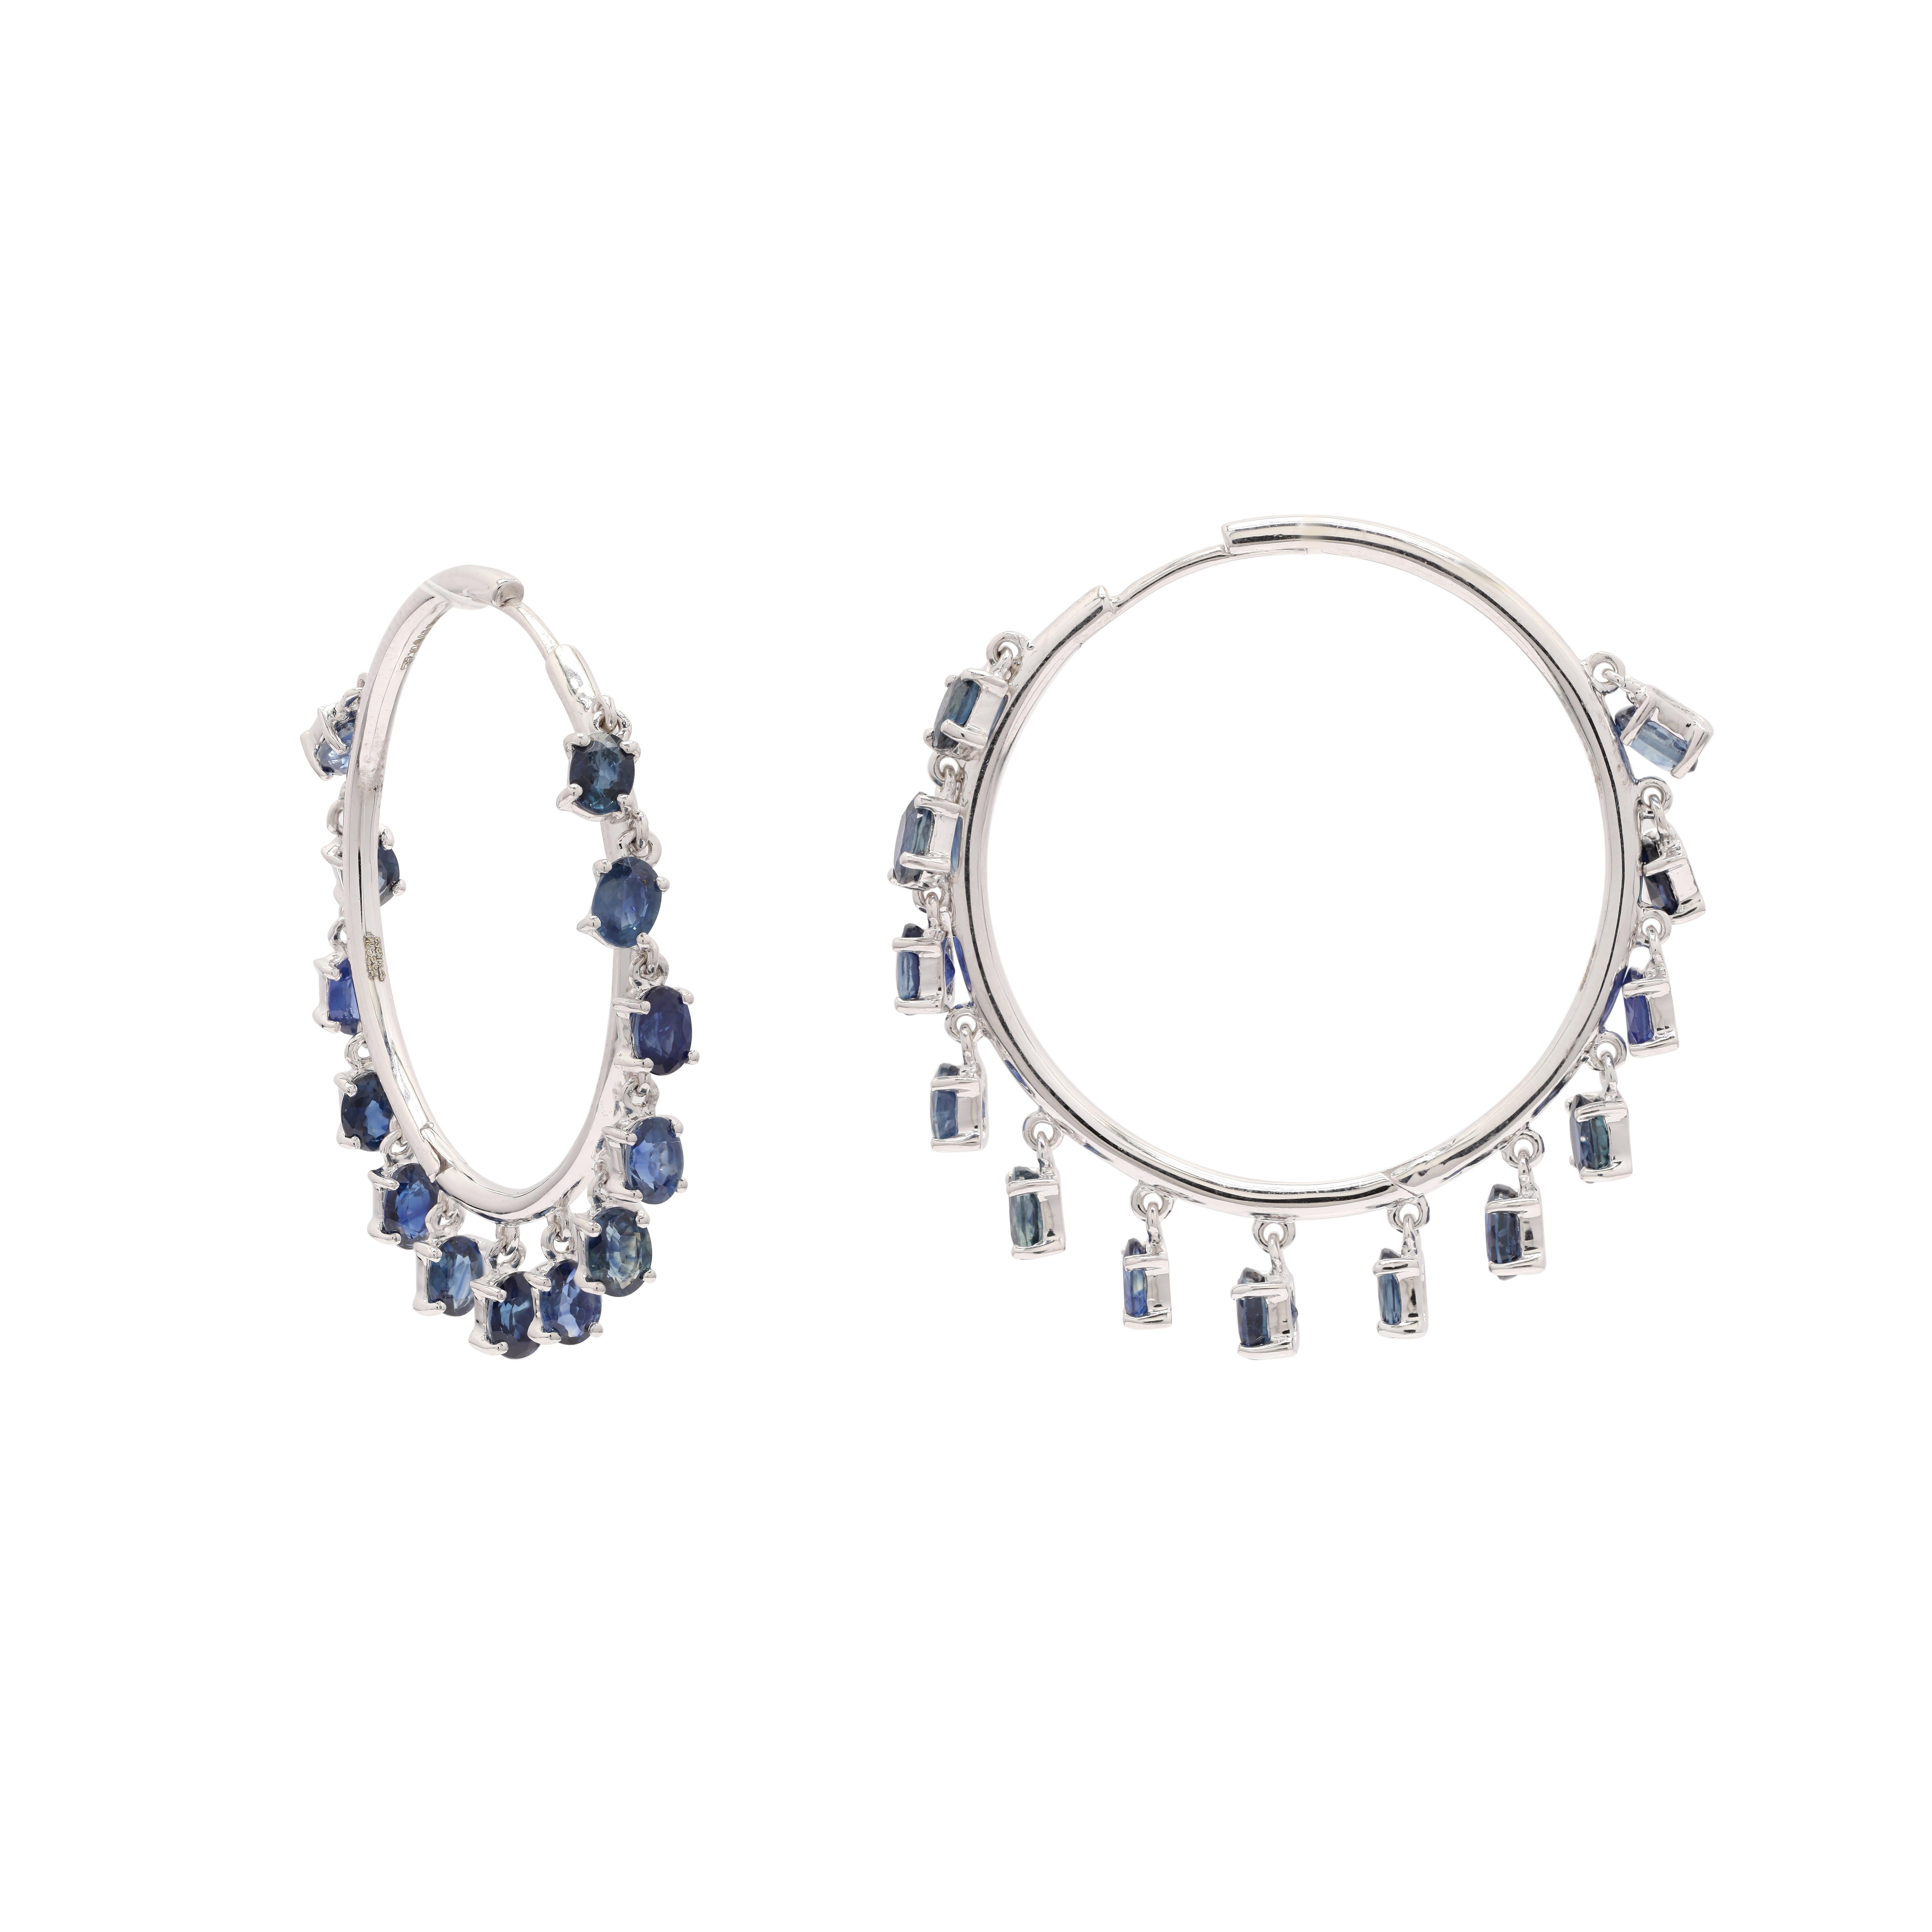 You shall need blue sapphire hoop earrings in 14K Gold to make a statement with your look. These earrings create a sparkling, luxurious look featuring oval cut gemstone.
If you love to gravitate towards unique styles, this piece of jewelry is